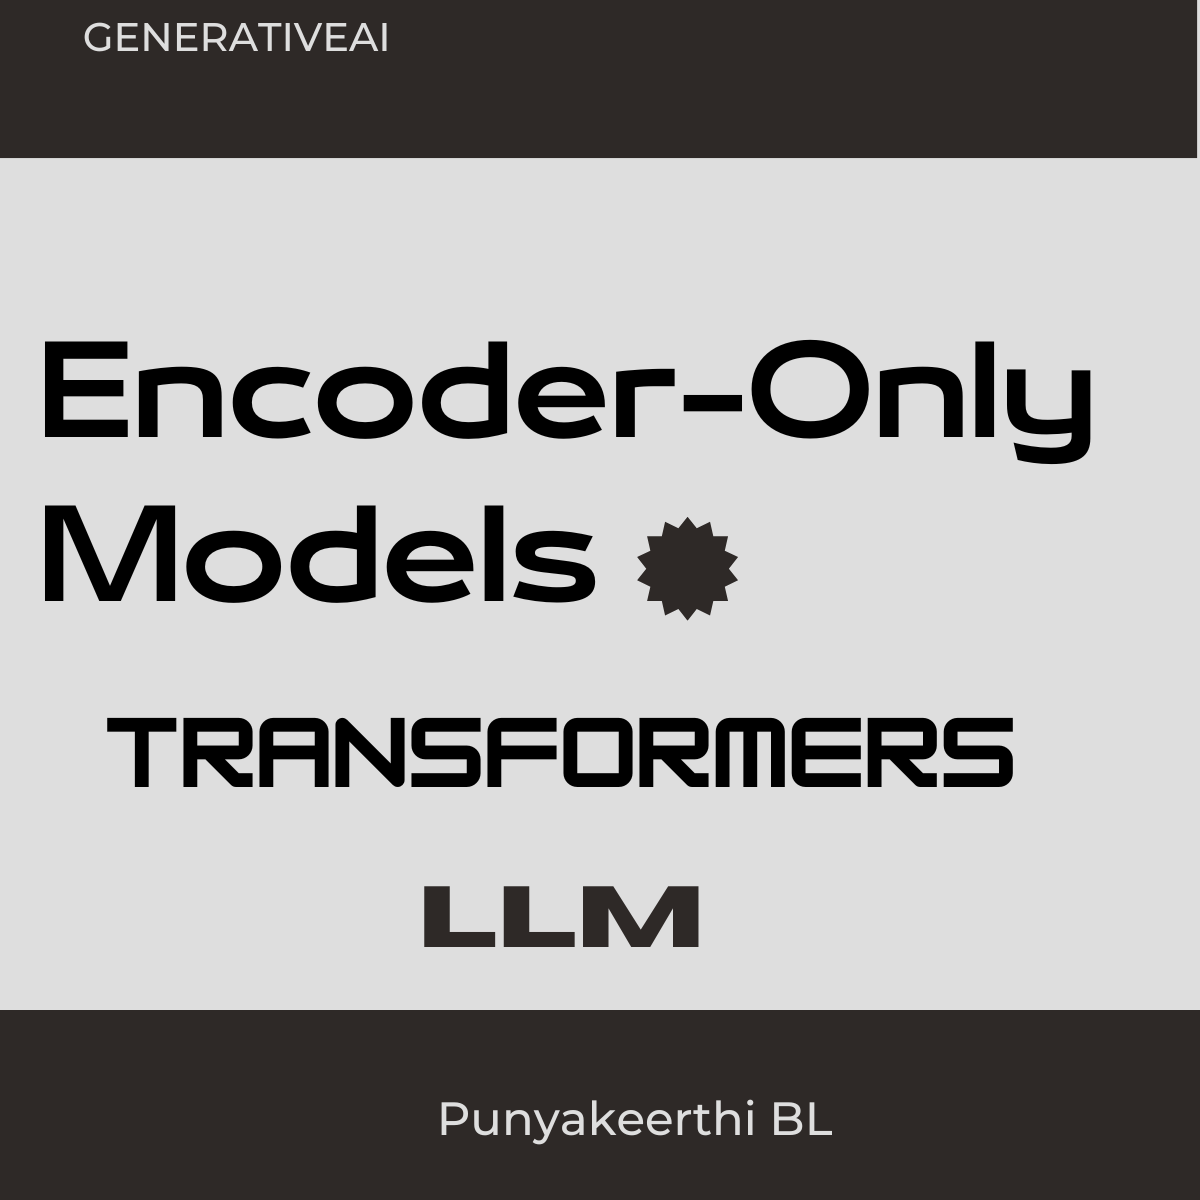 Understanding Encoder-Only Models: Simplifying Text with Single-Direction Power